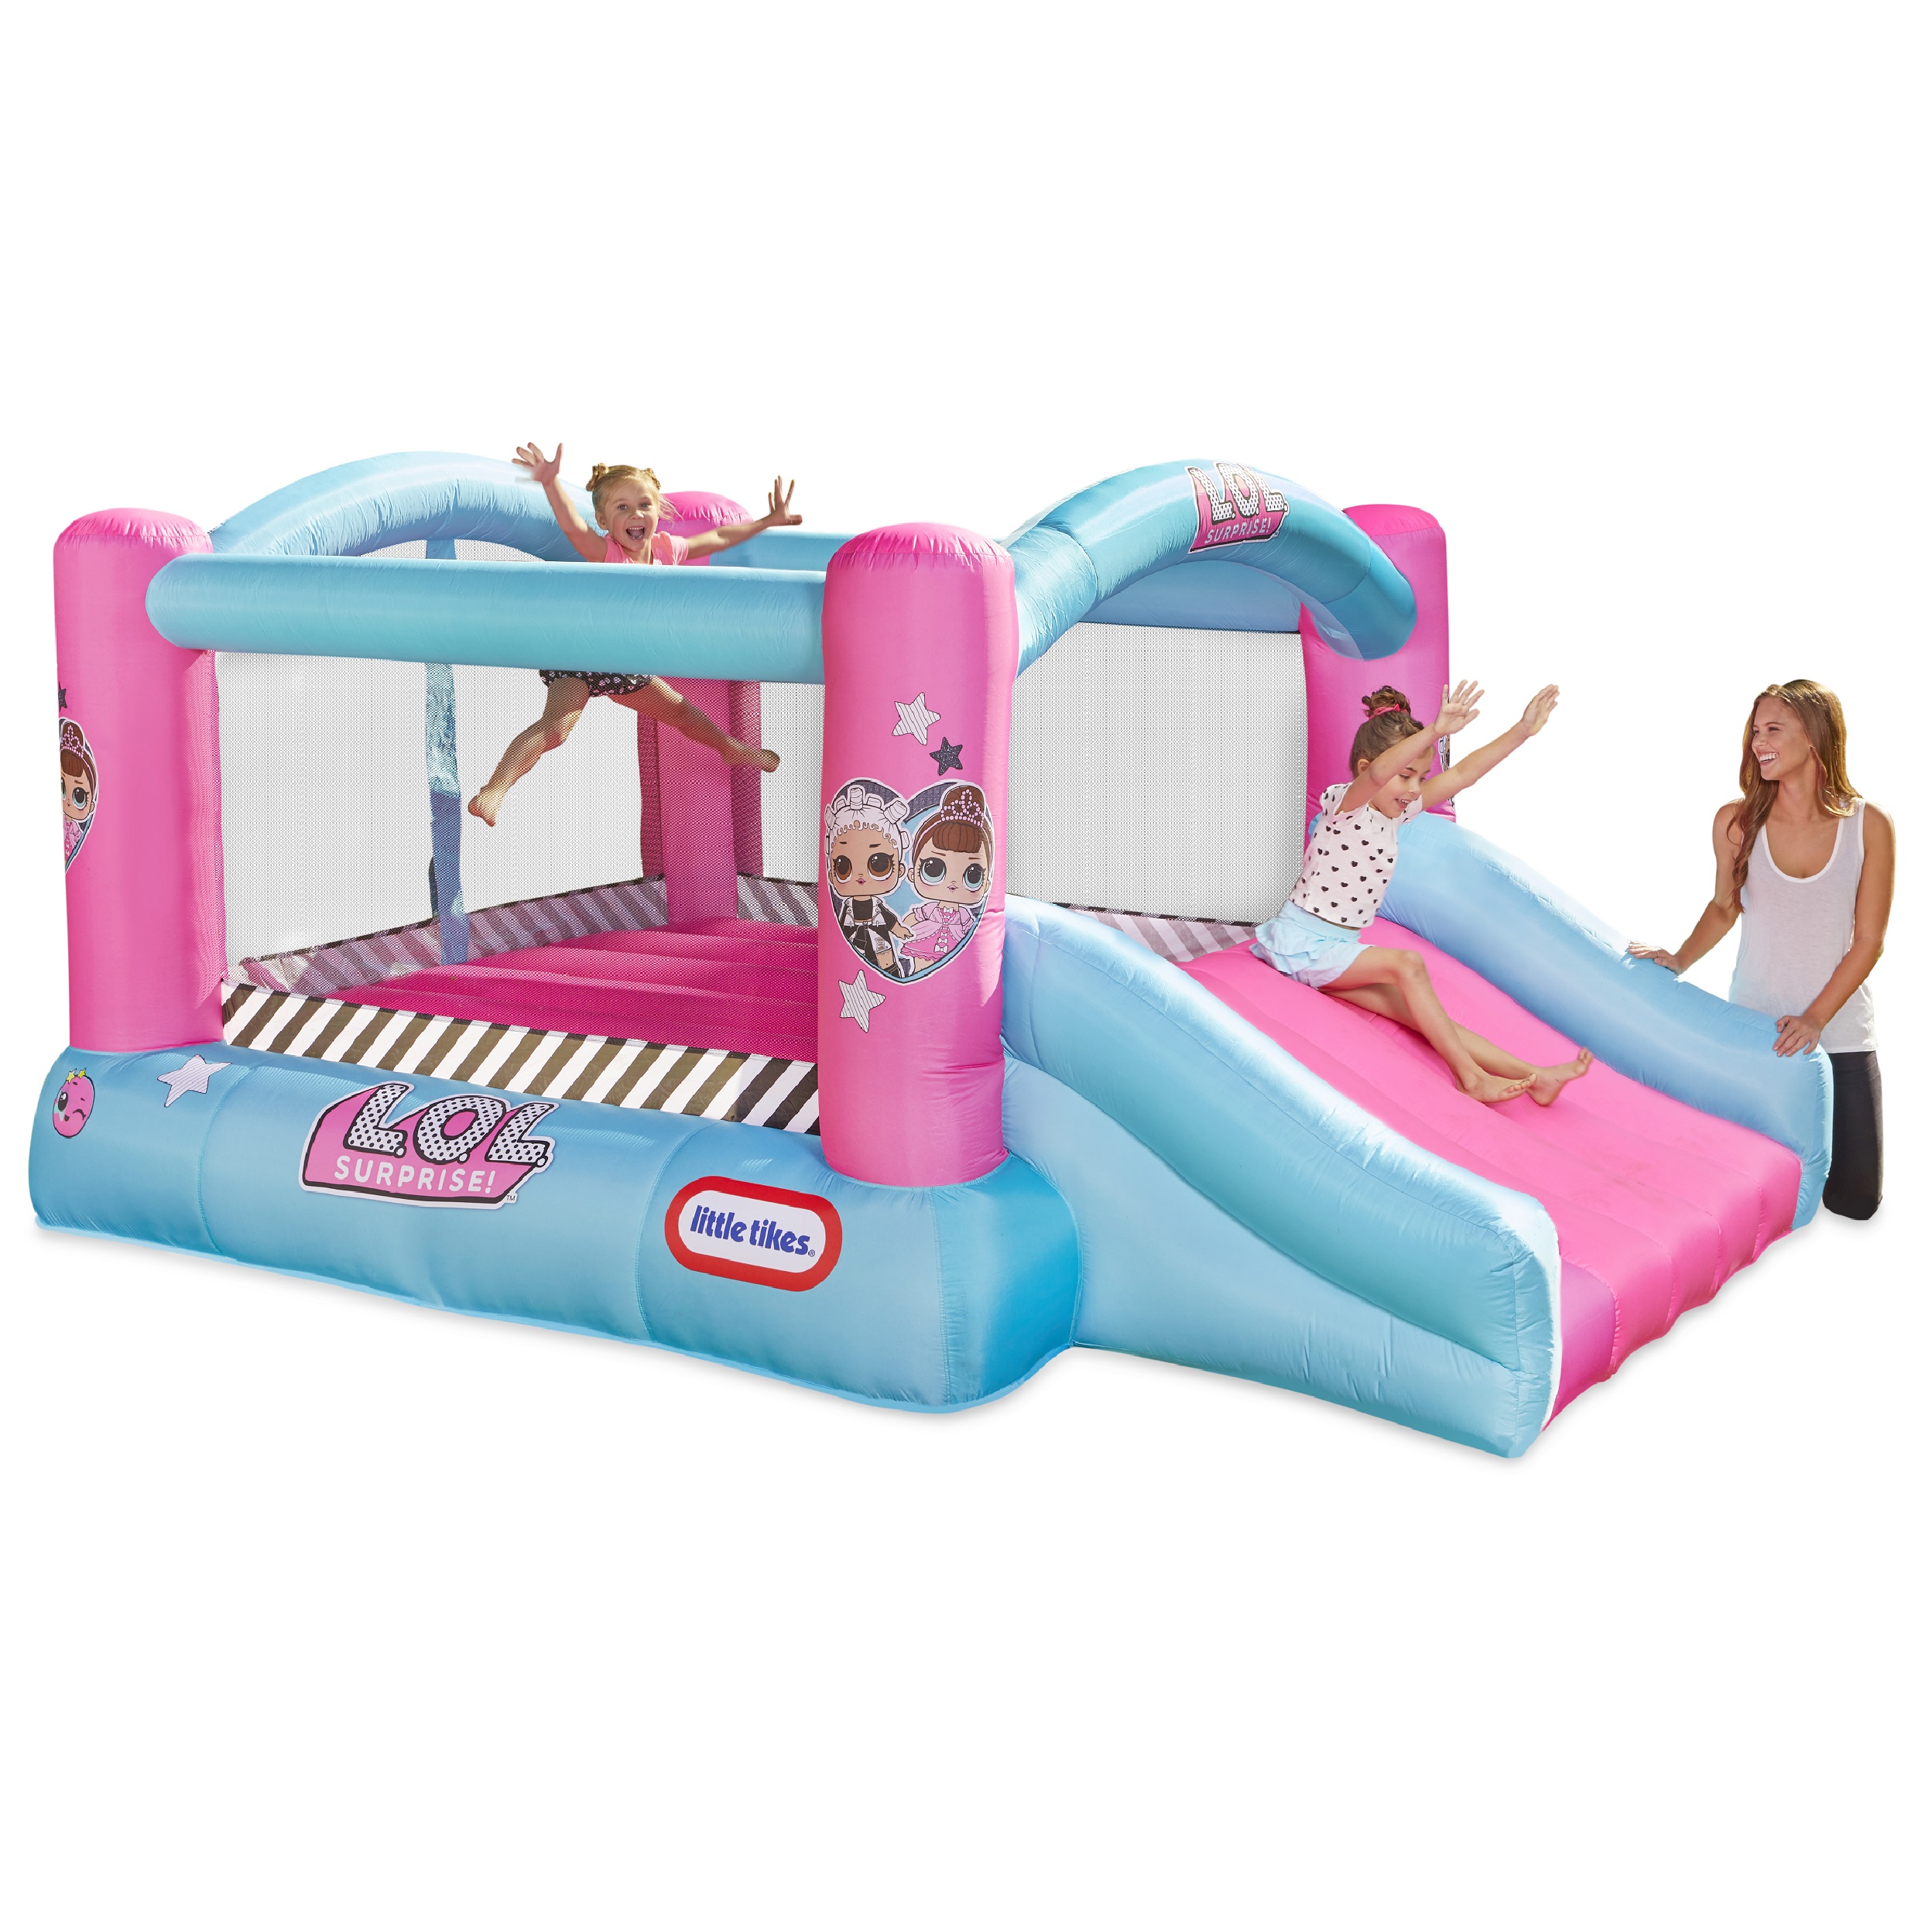 L.O.L. Surprise! Jump ‘n Slide Inflatable Bounce House with Blower